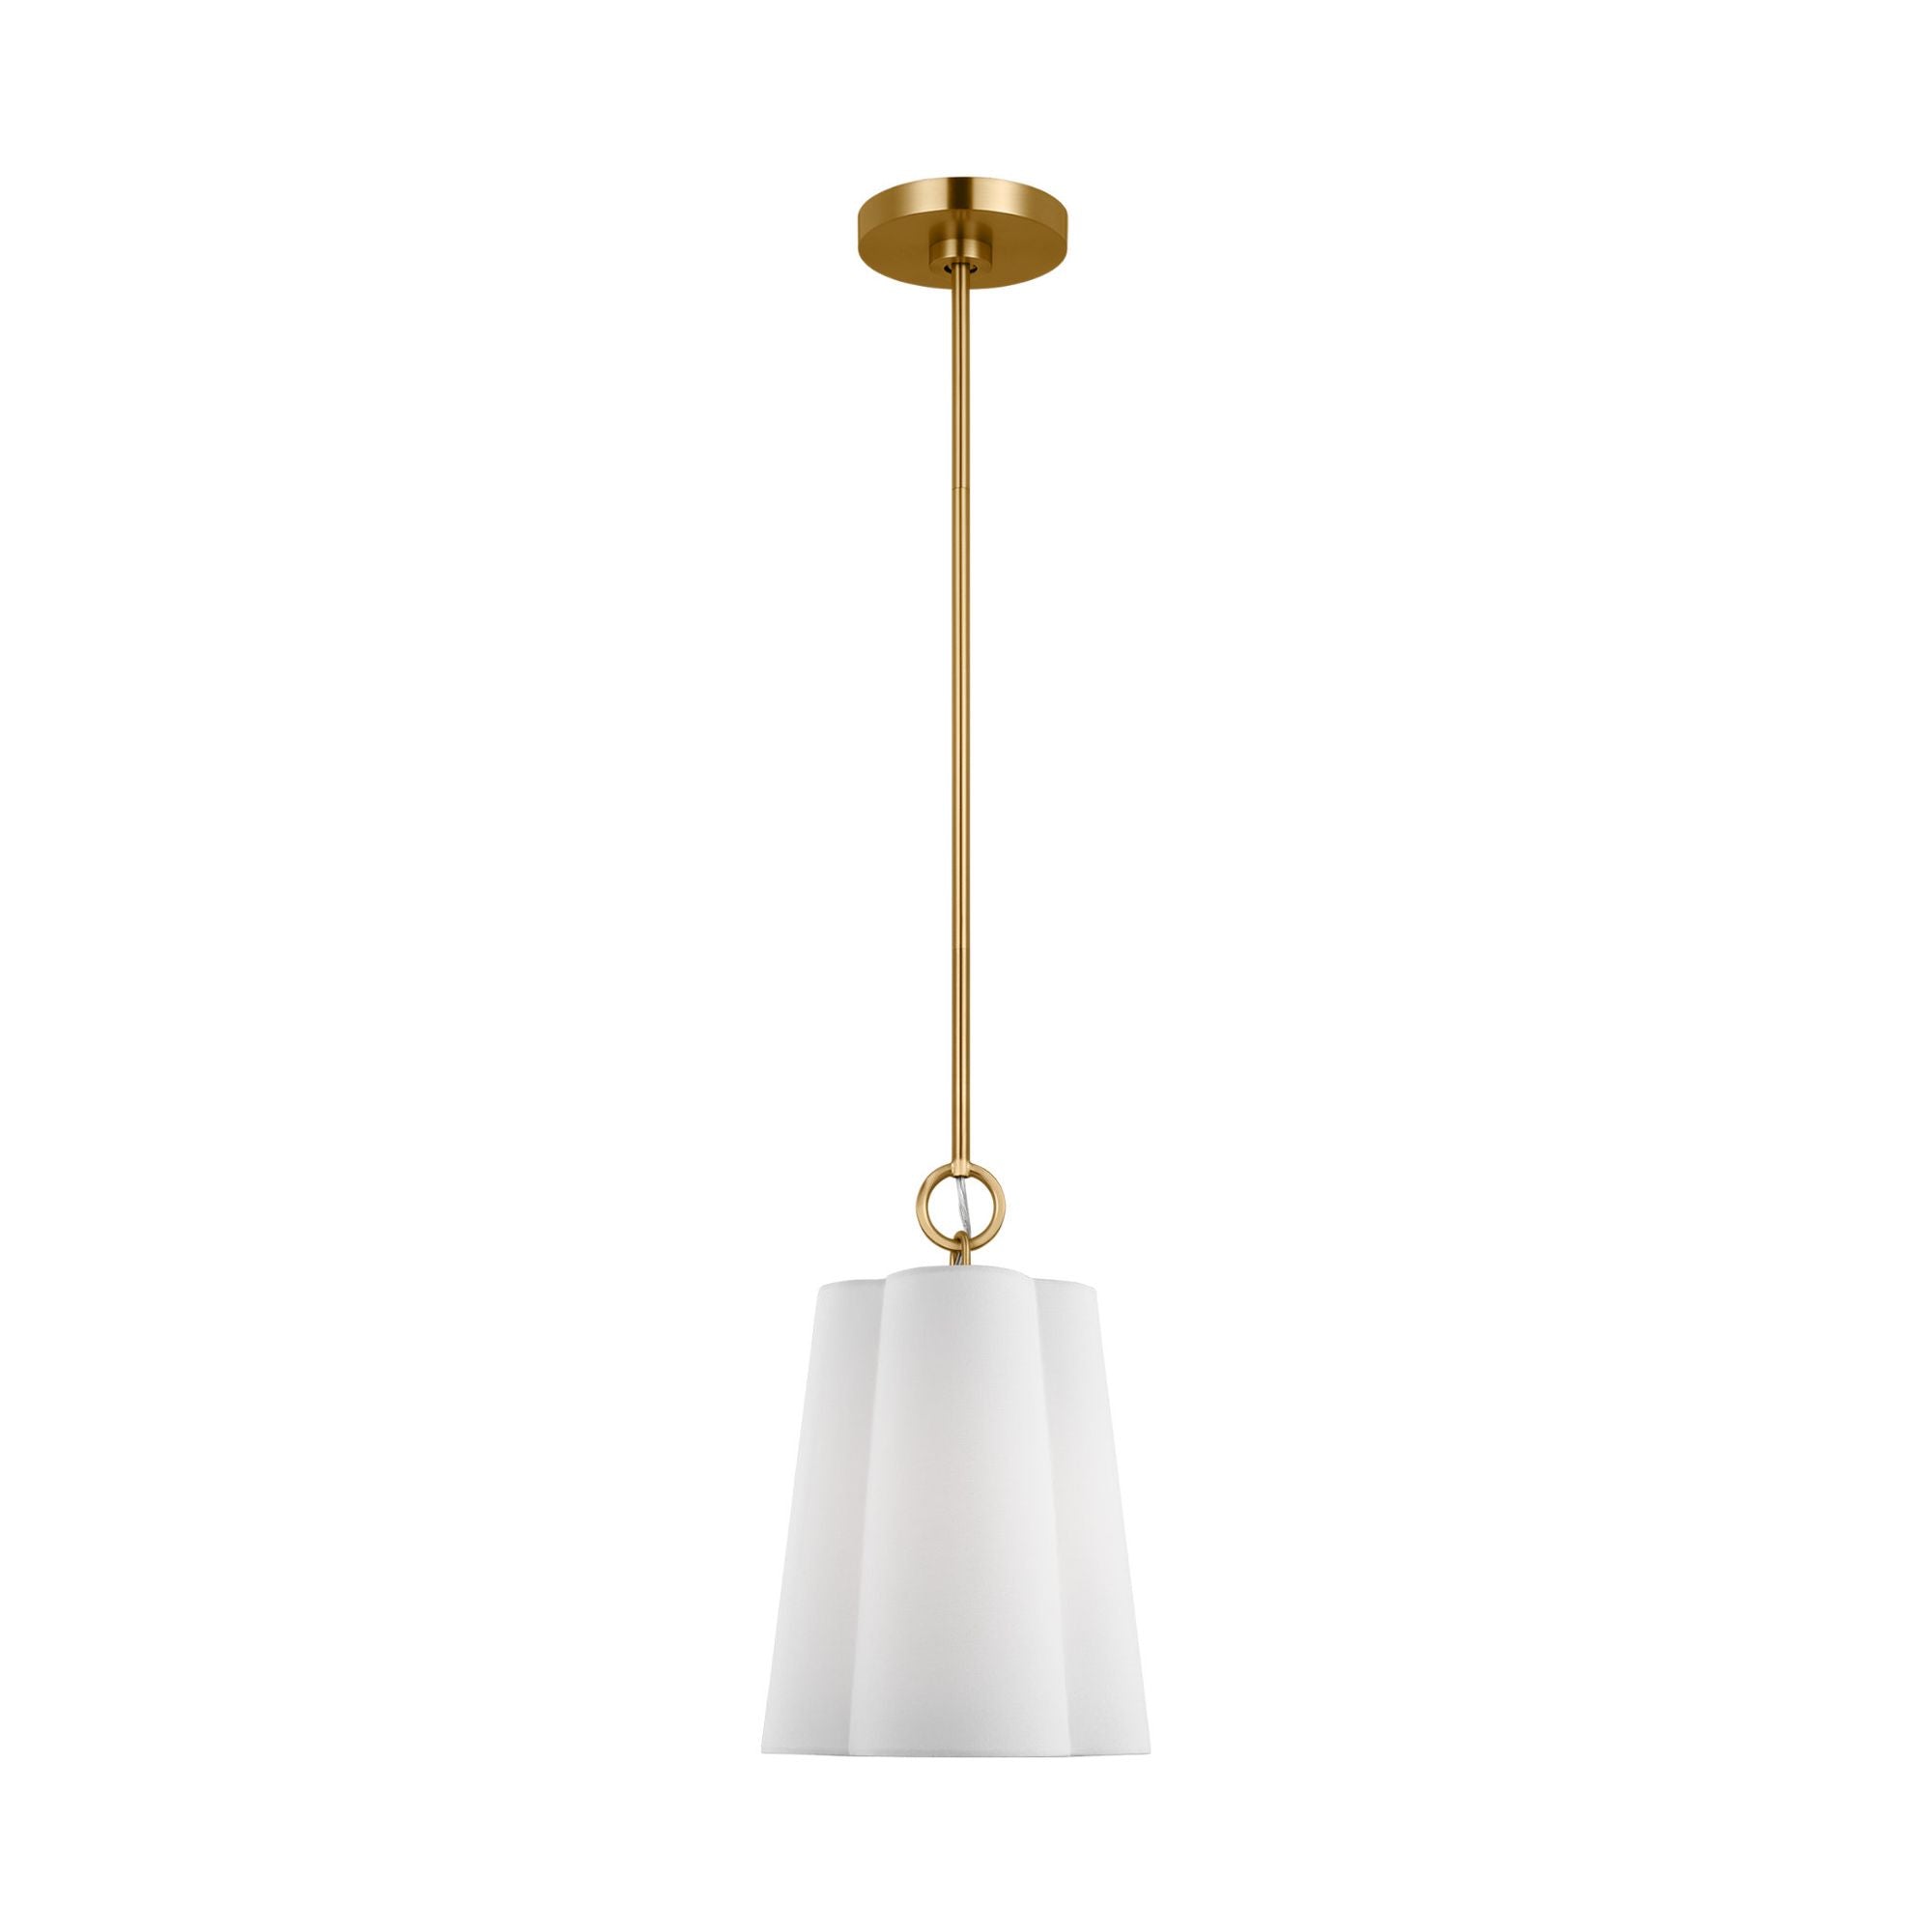 kate spade new york Bronte Small Hanging Shade in Burnished Brass